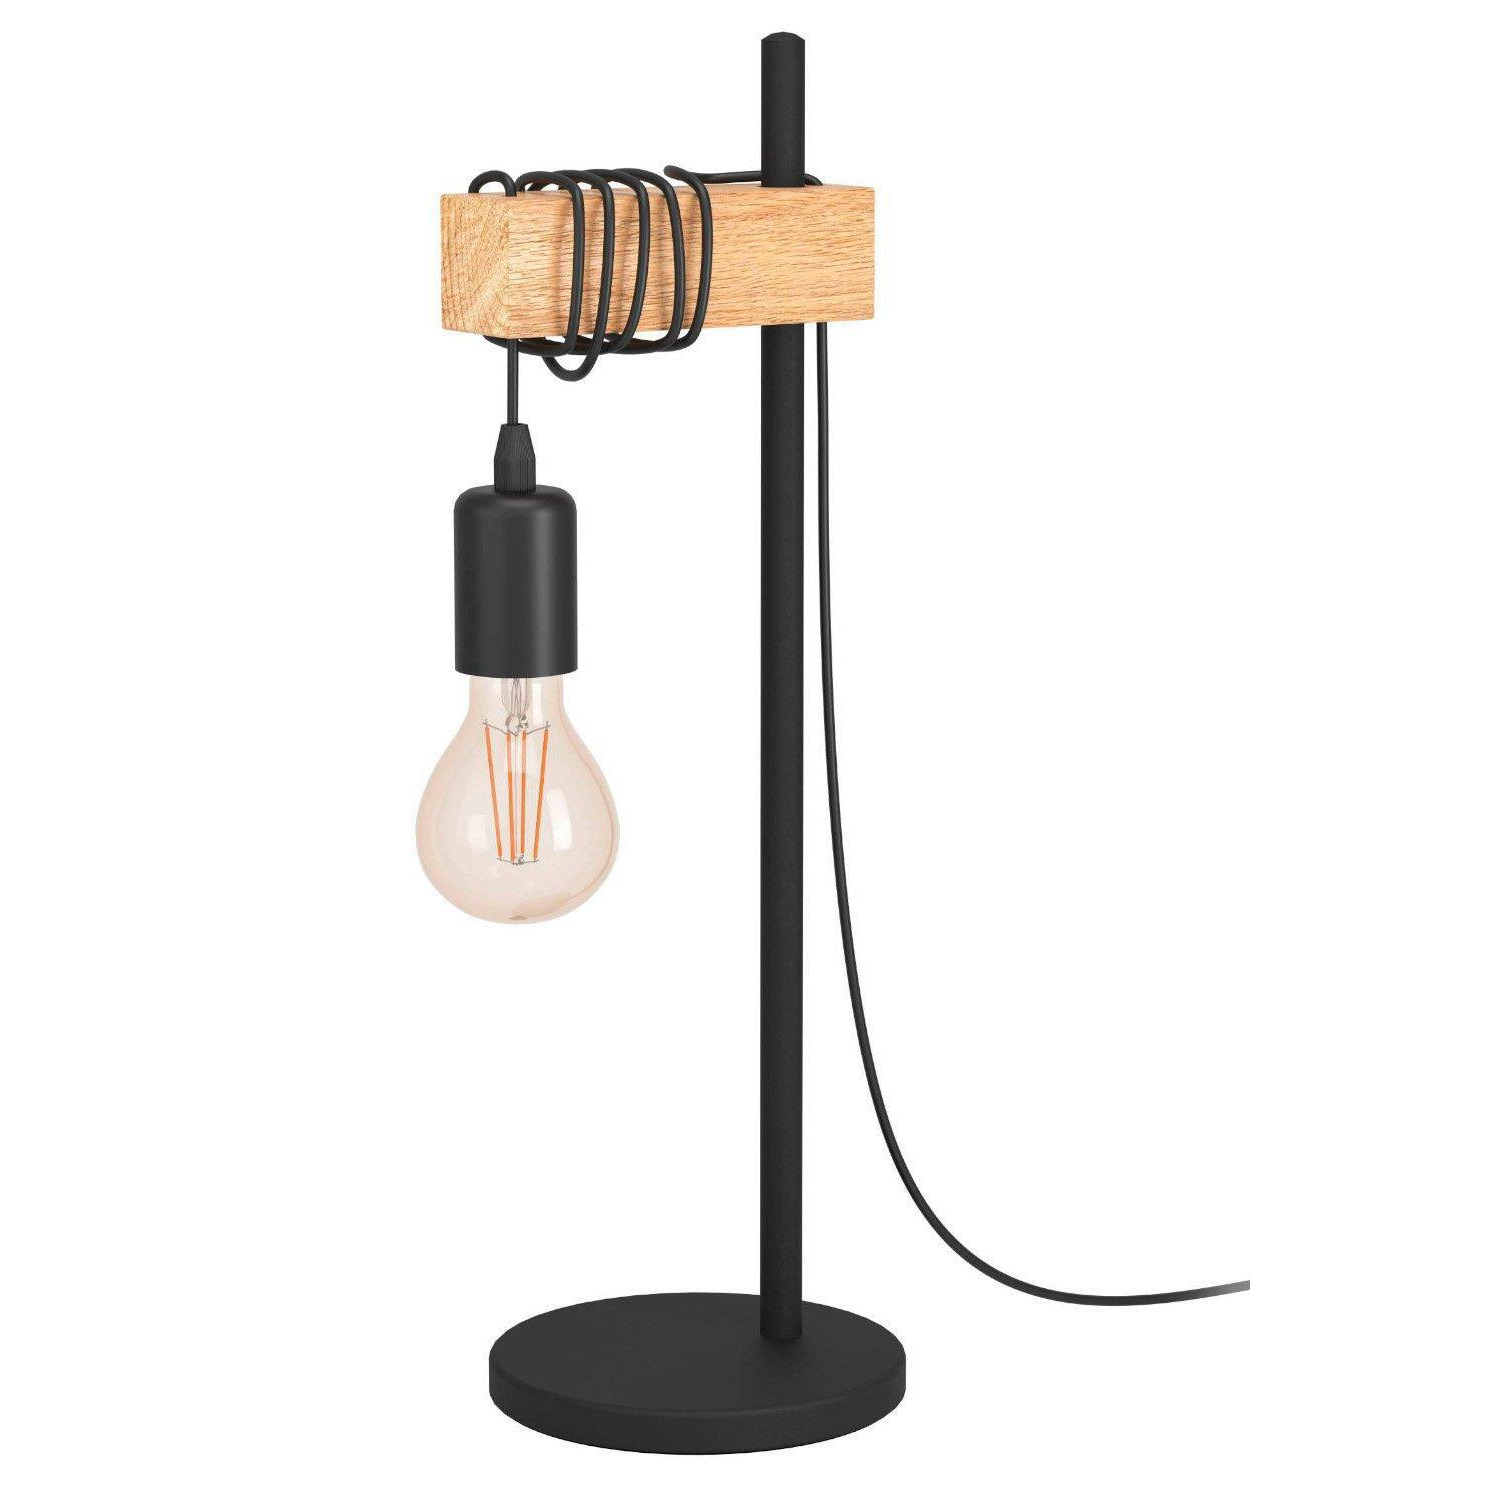 Townshend Natural Wood And Metal Table Lamp - image 1